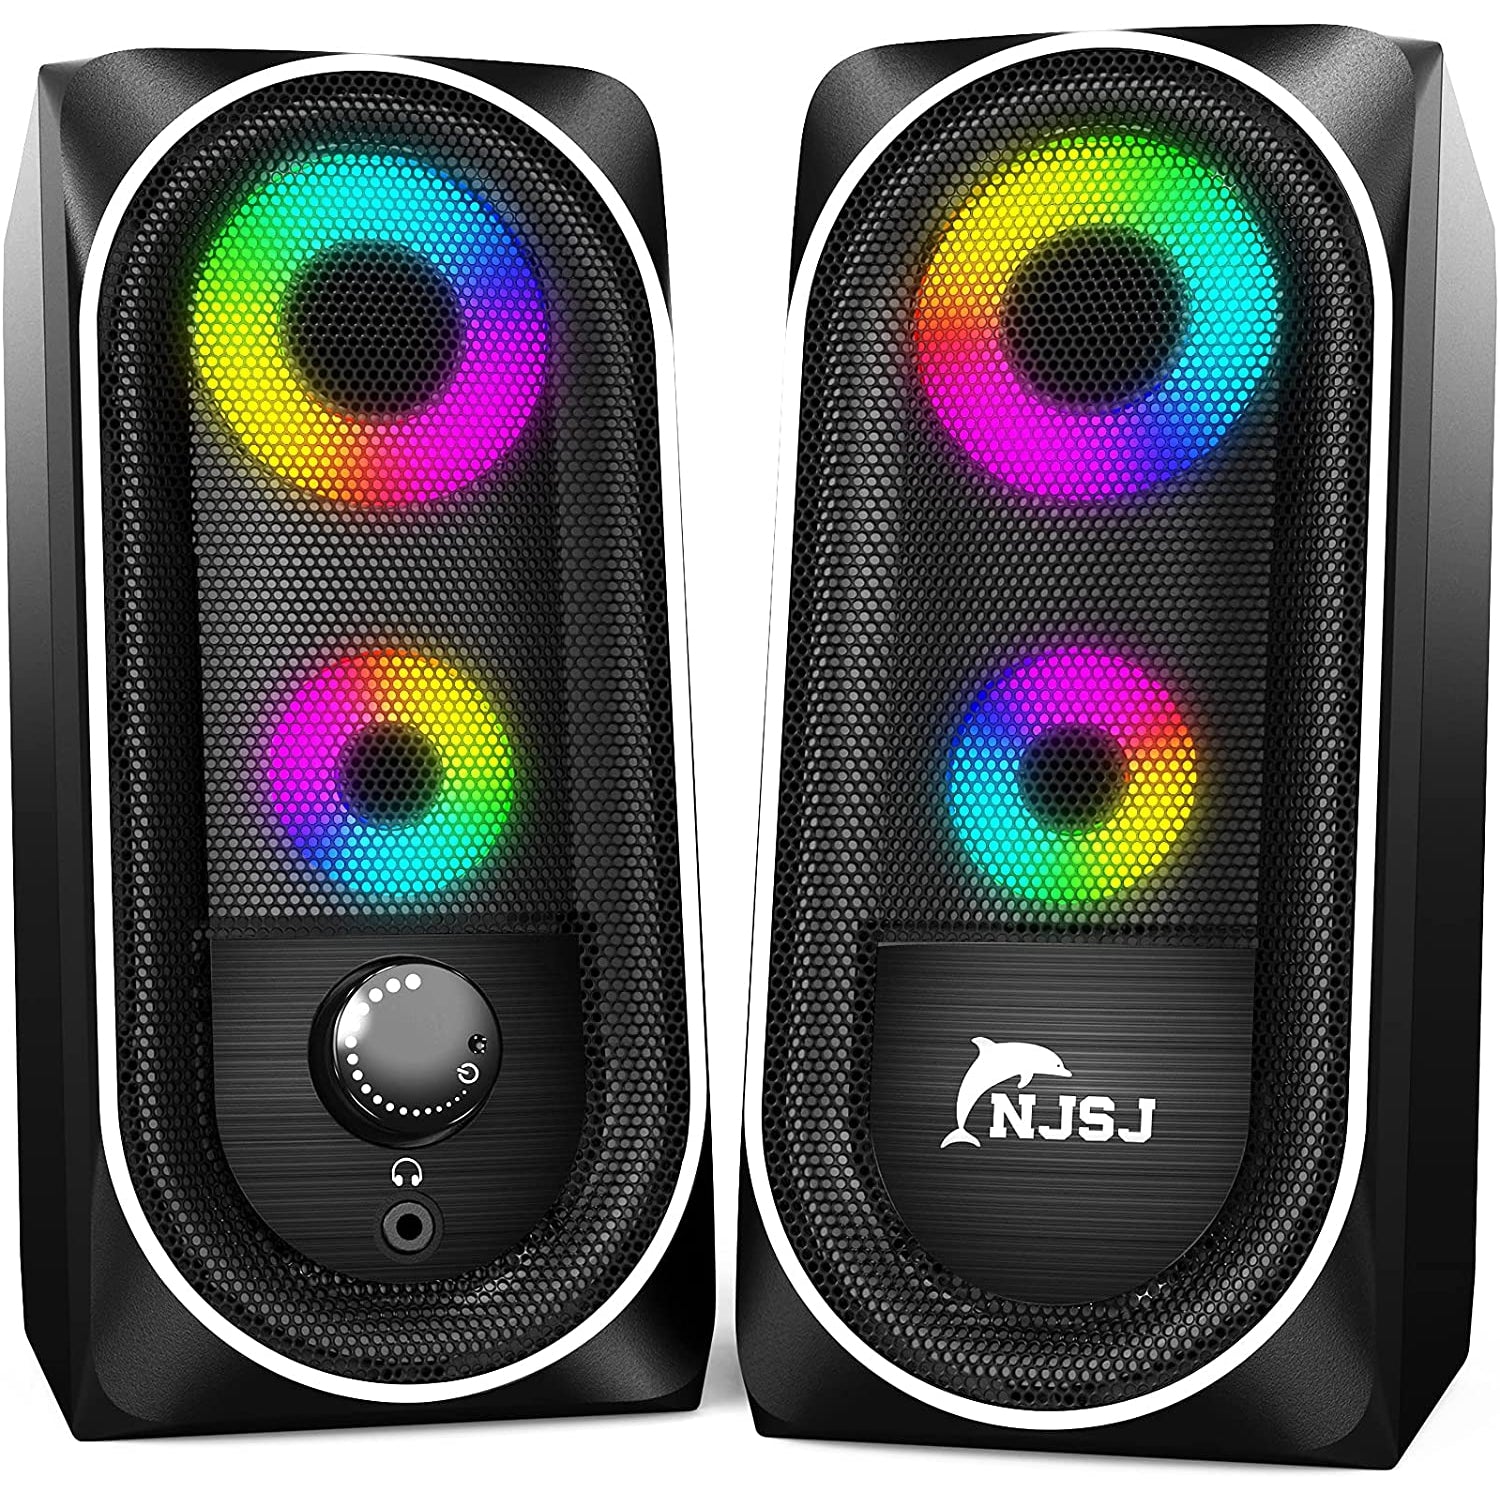 NJSJ Wired RGB Gaming Speakers for Desktop,10W USB Powered Stereo Sound, Connect via AUX 3.5mm Plug to Computer, Laptop, Monitor, TV